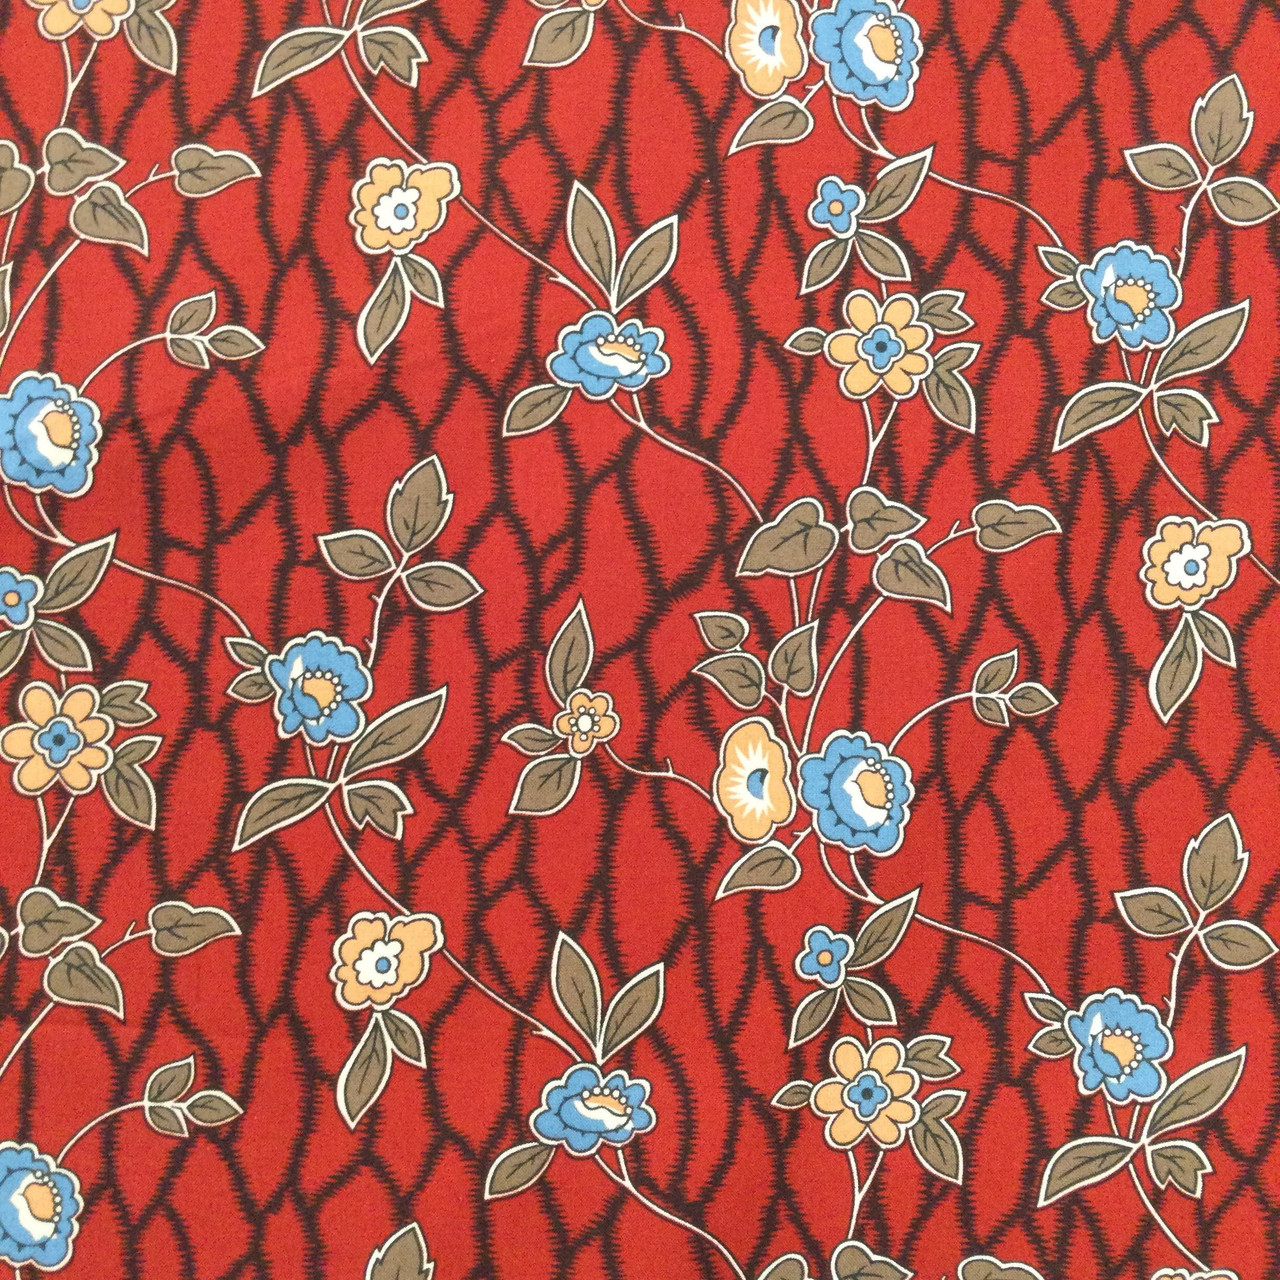 CLEARANCE* Plain/Print 100% Cotton Fabric Material Quilting Dress Fabric  44